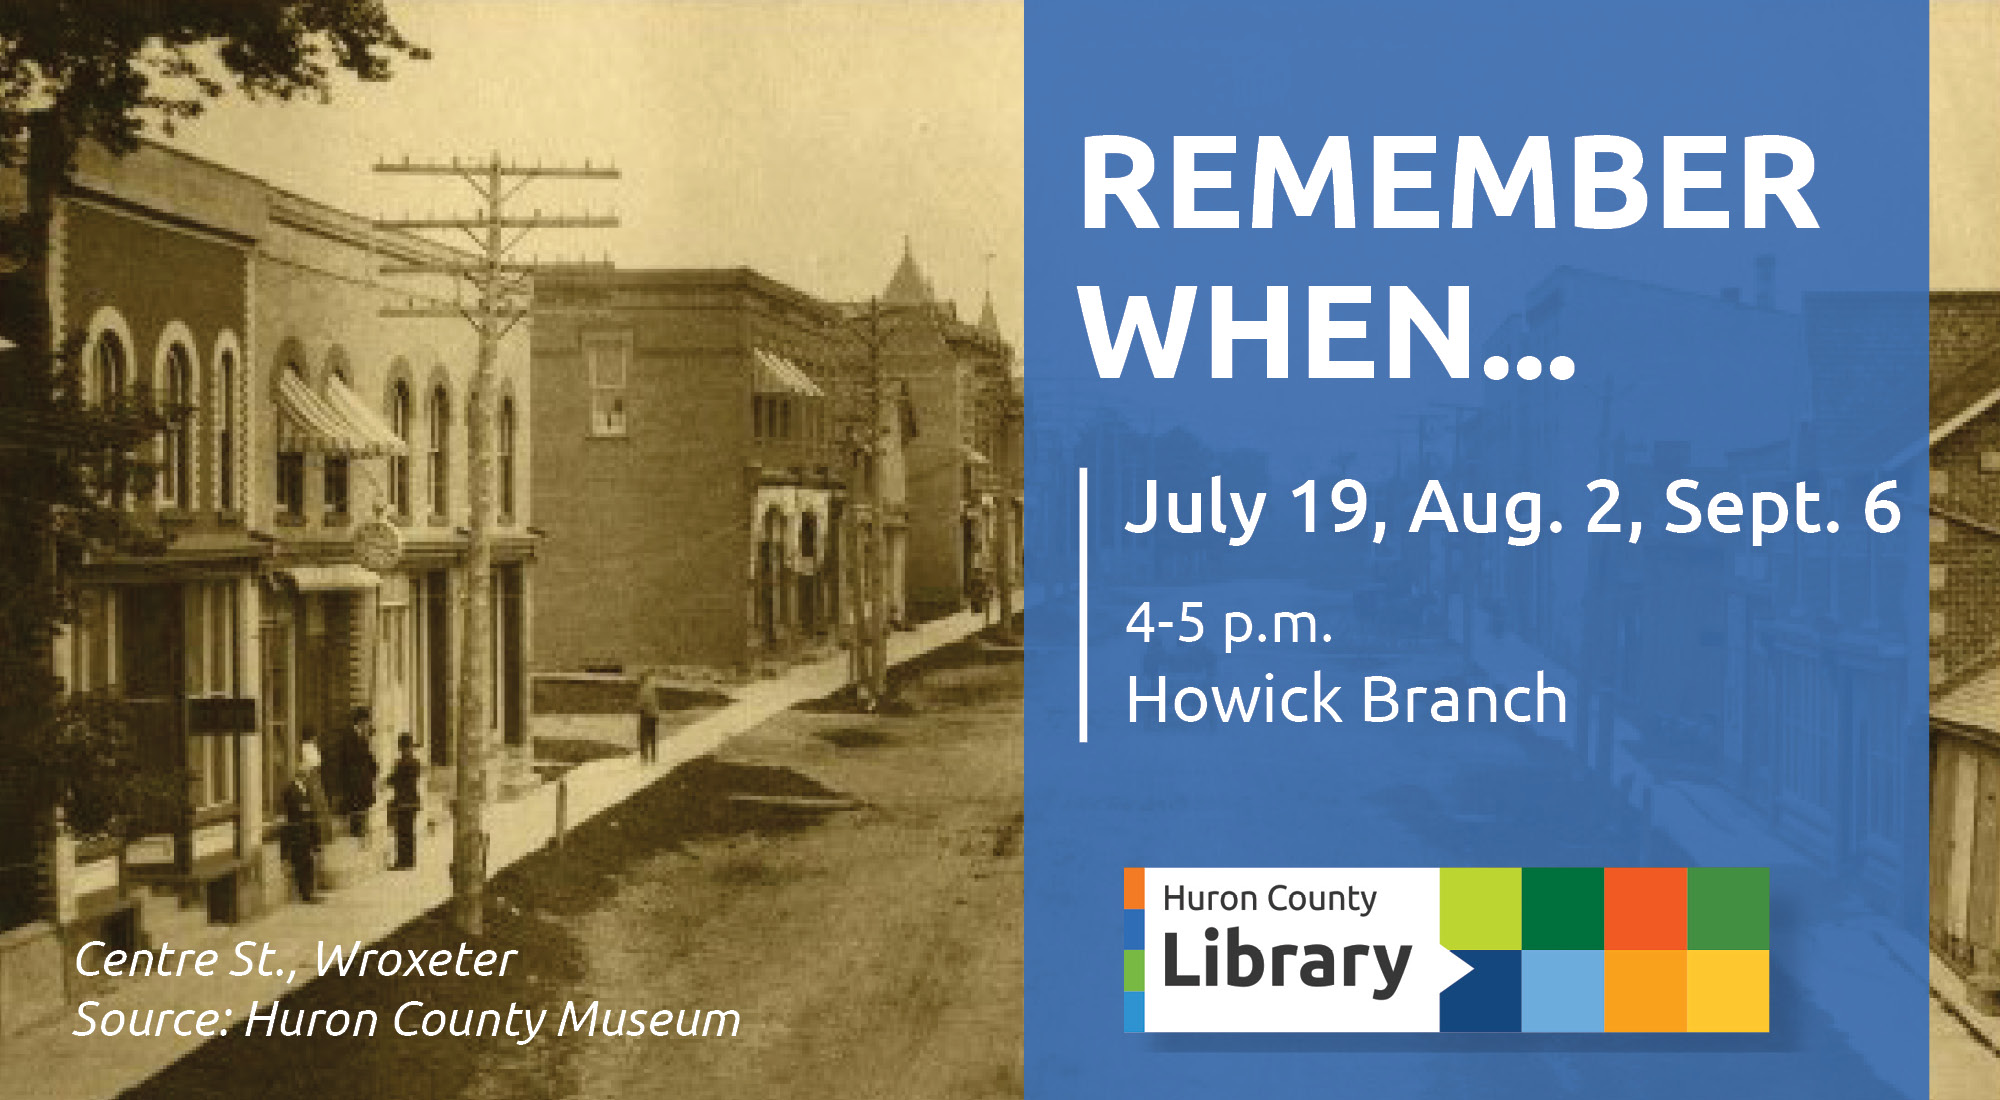 Historic image of Wroxeter with text promoting Remember When at Howick Branch